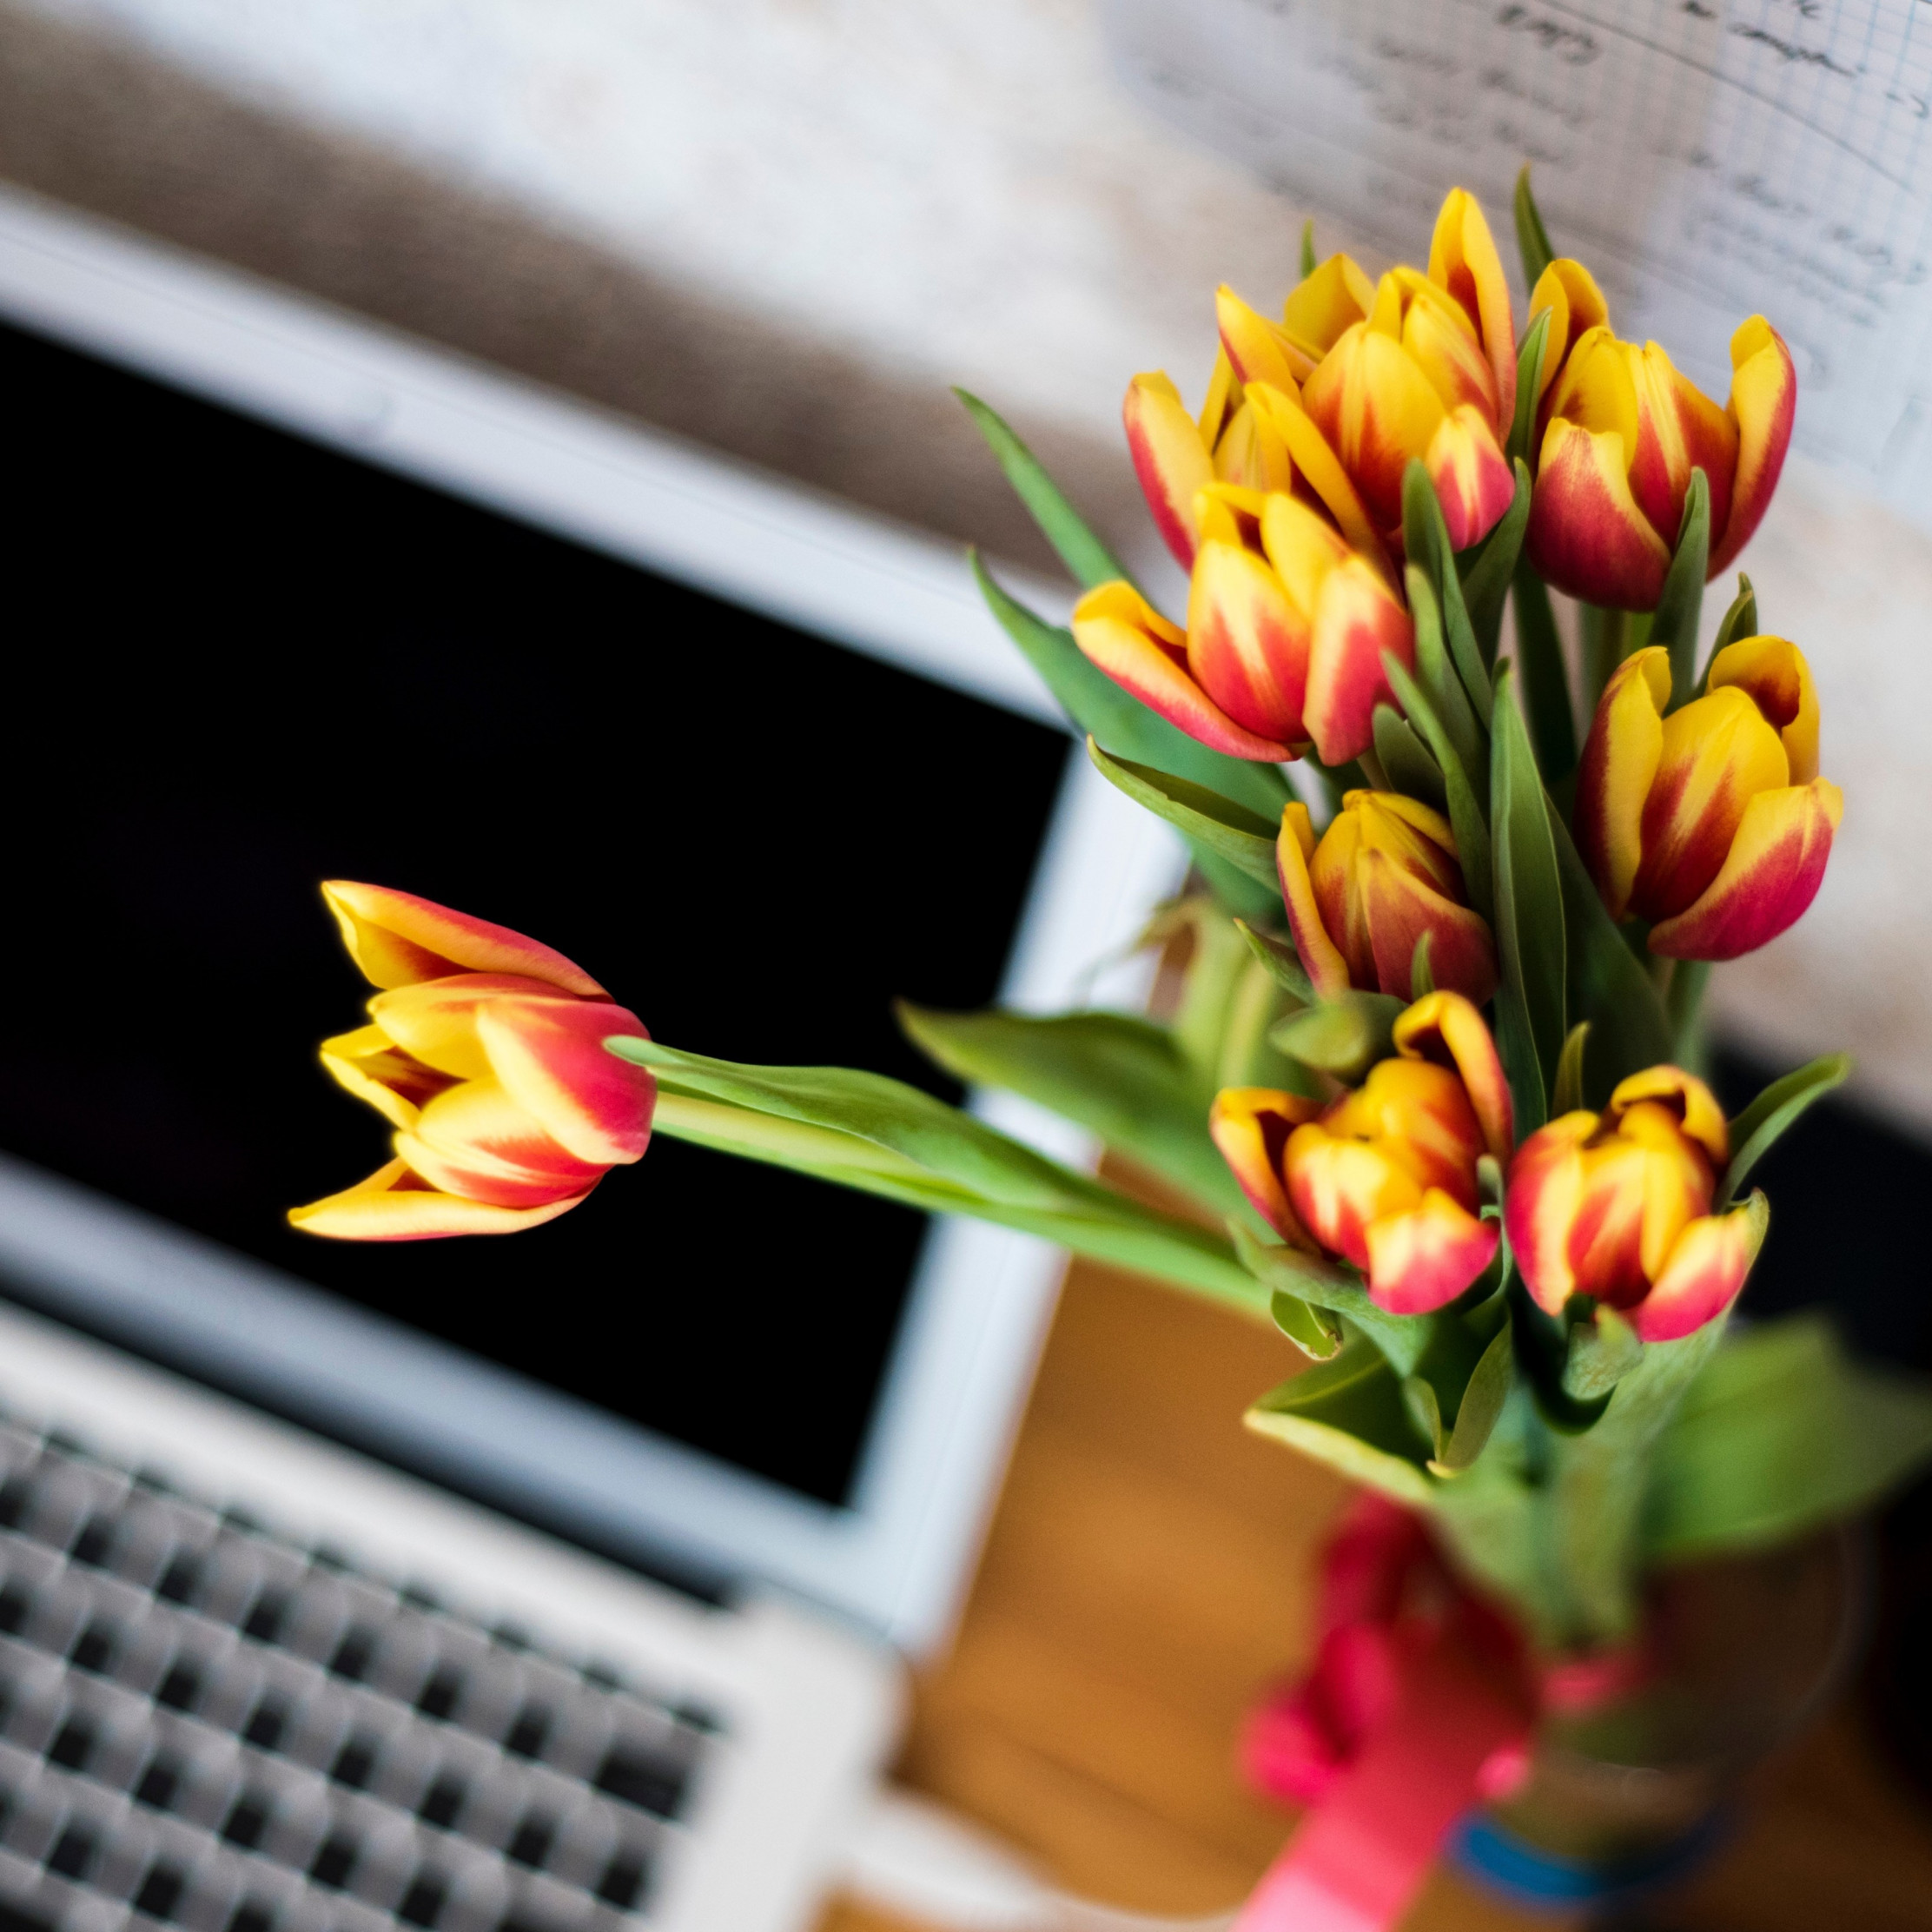 Laptop and tulips bouquet wallpaper 2224x2224